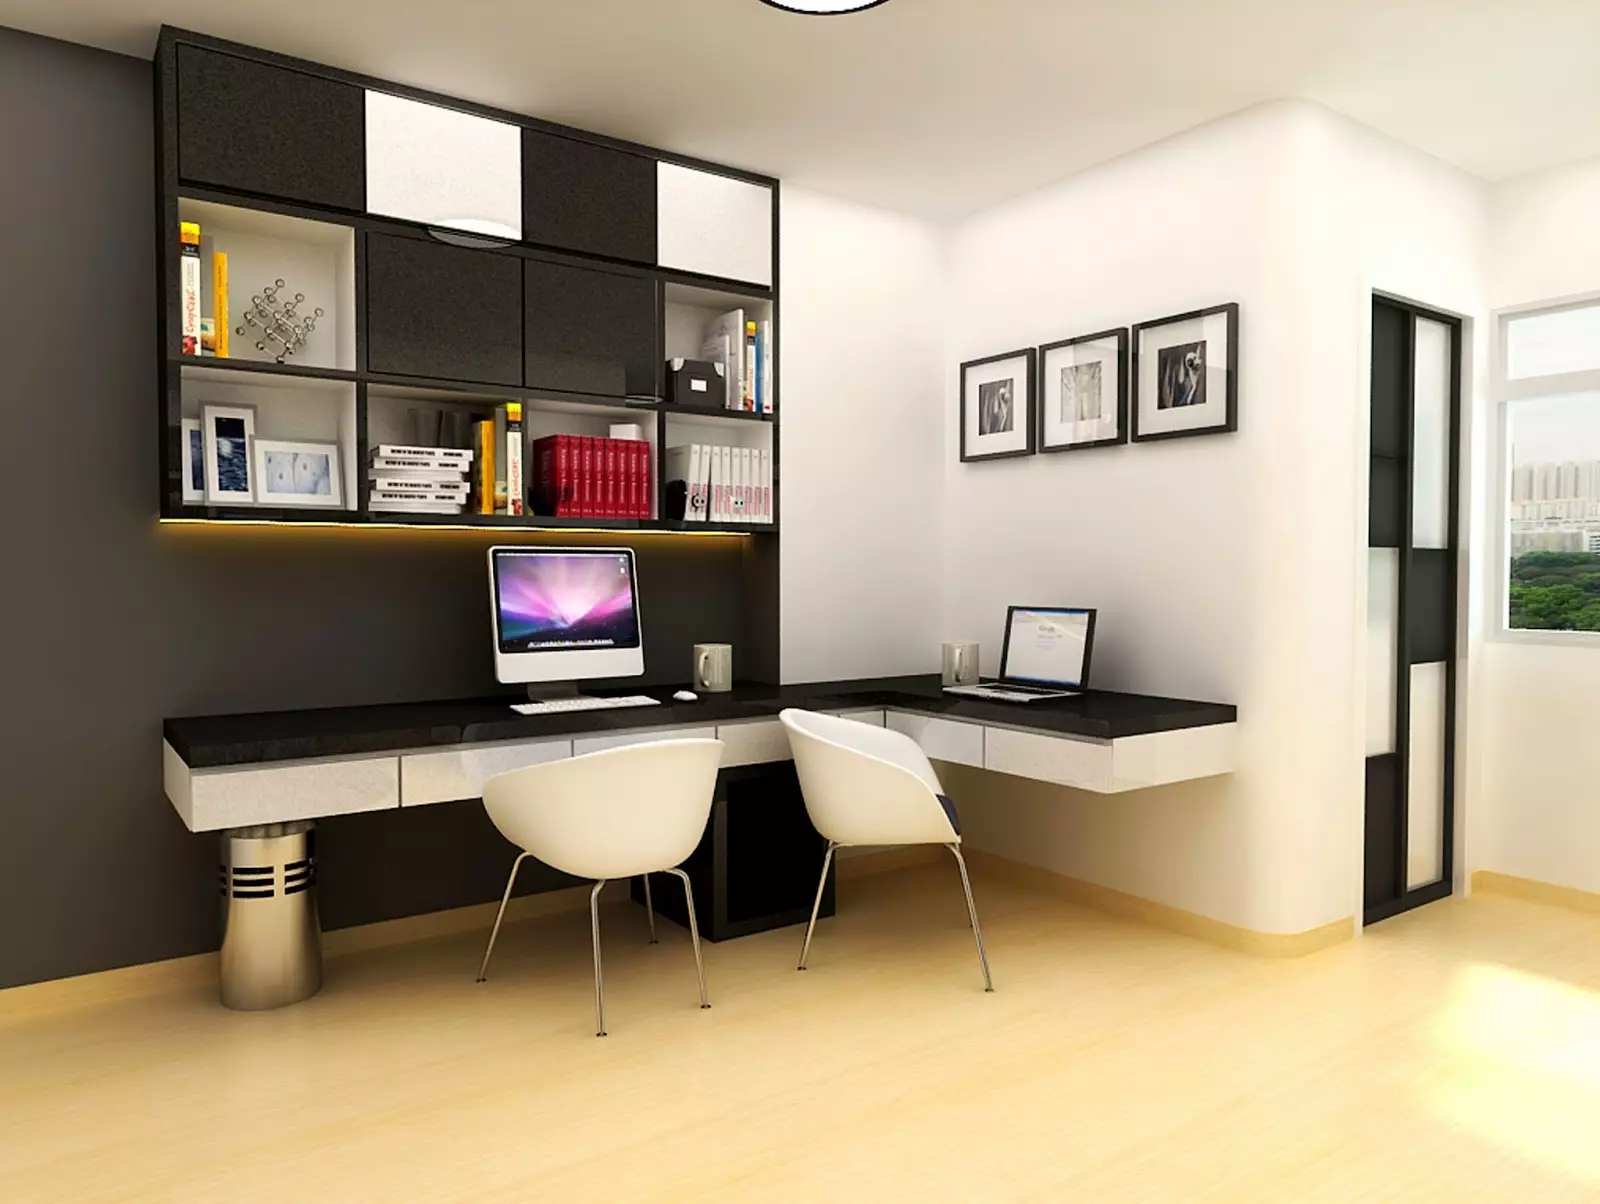 Incorporating Study Spaces into Home Design